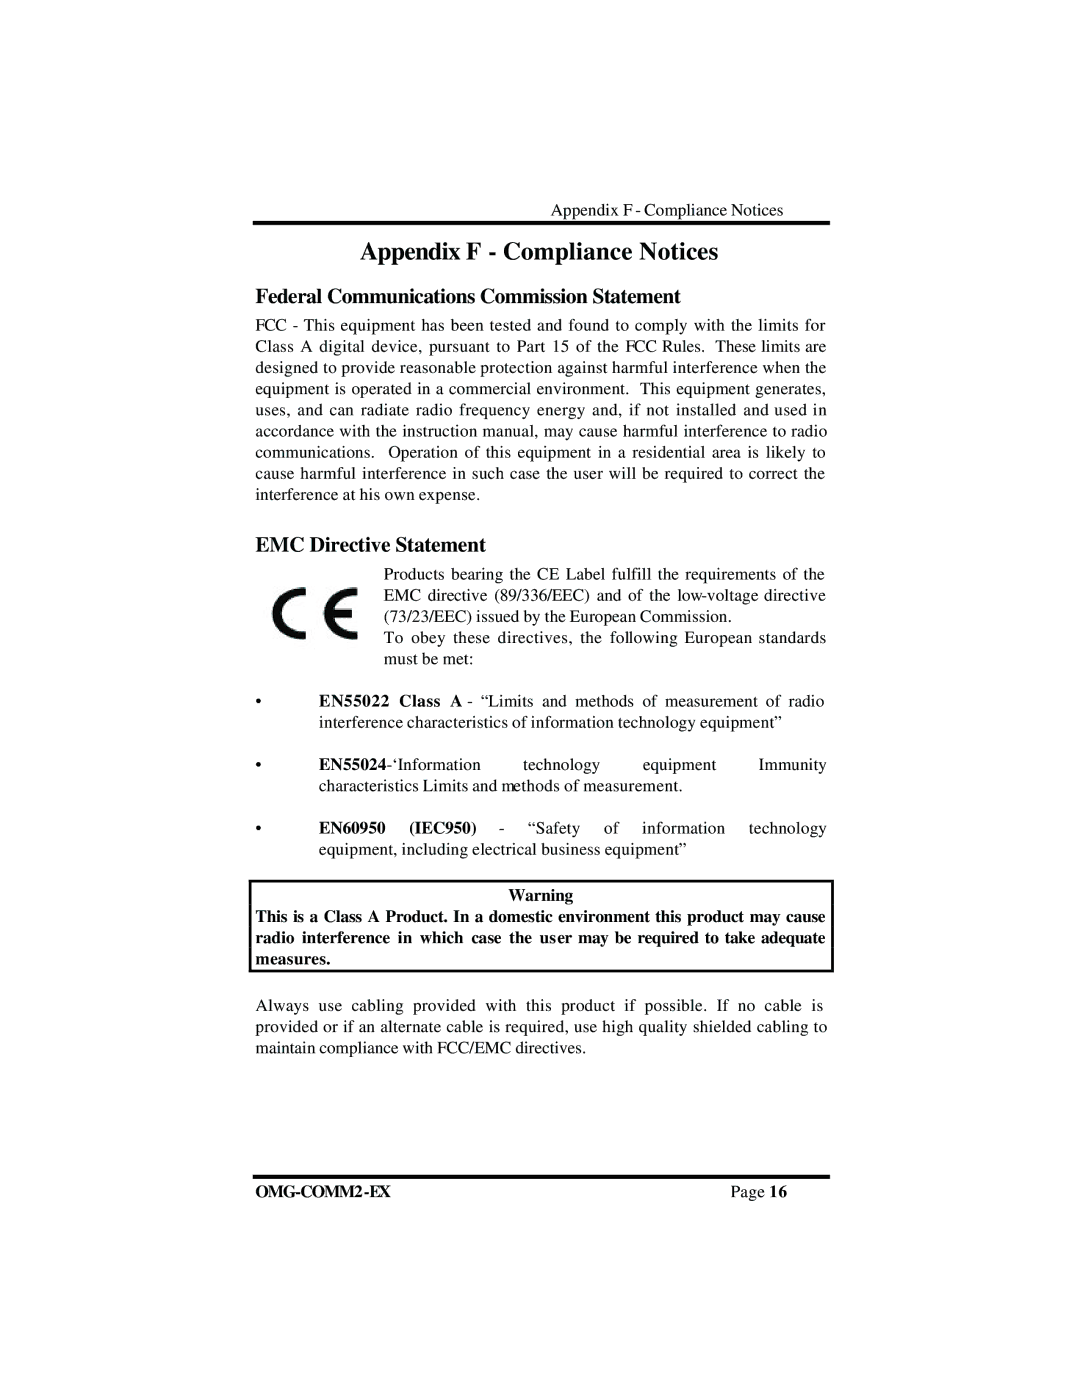 Omega Vehicle Security OMG-COMM2-EX manual Appendix F Compliance Notices 